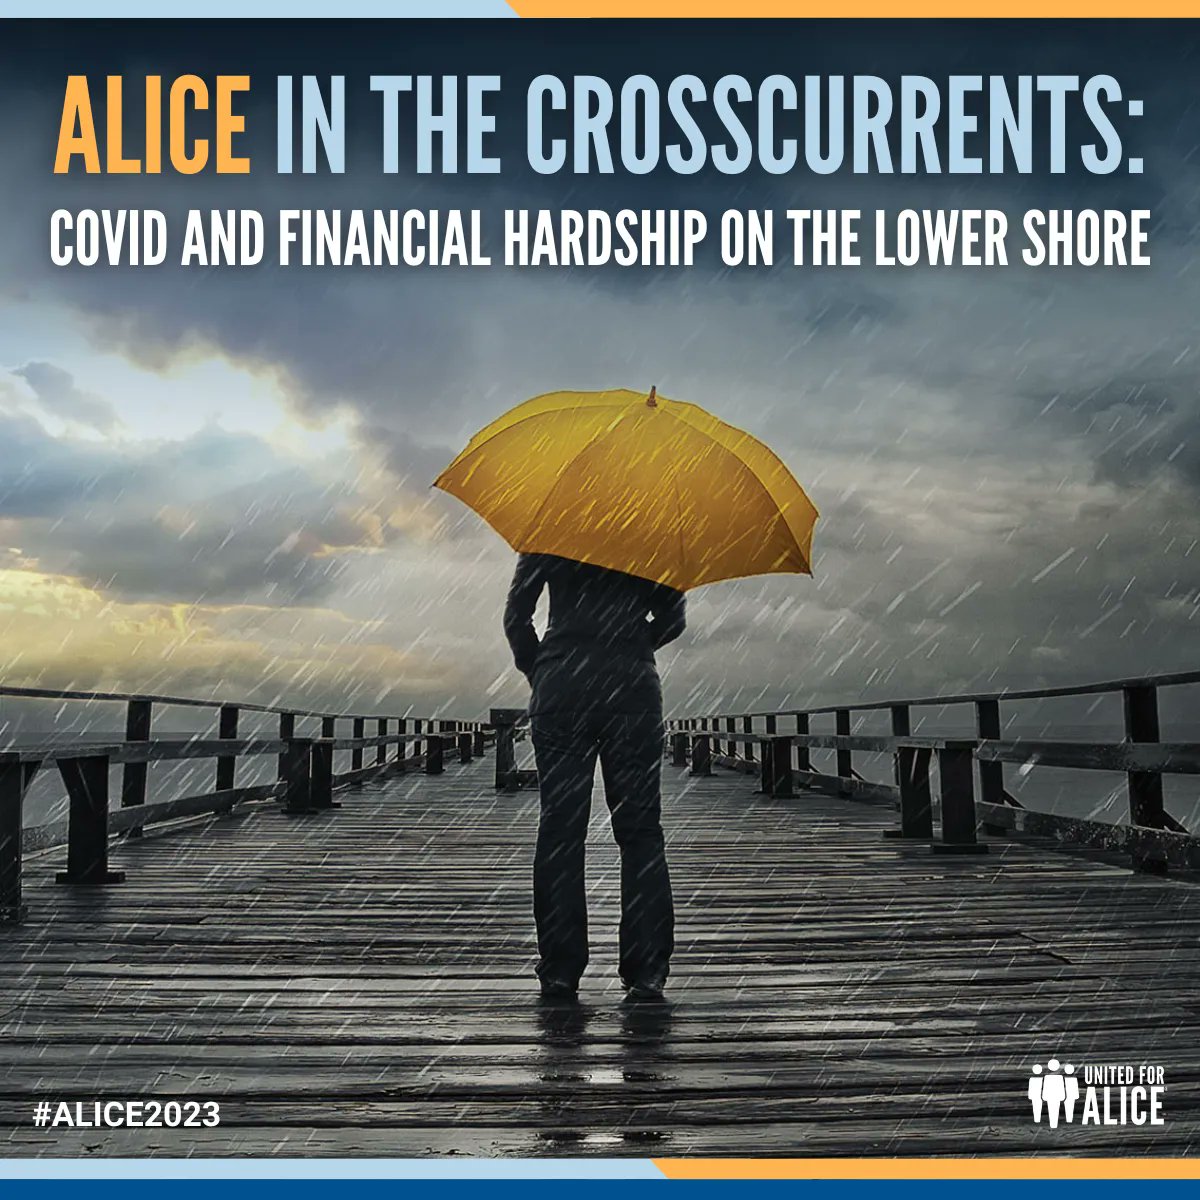 The pandemic unleashed competing economic forces that transformed our world. How did ALICE fare financially? #UnitedForALICE launches its new Report for MD, “ALICE in the Crosscurrents,” about the impact of these forces on struggling households. buff.ly/3pJpHKM #ALICE2023